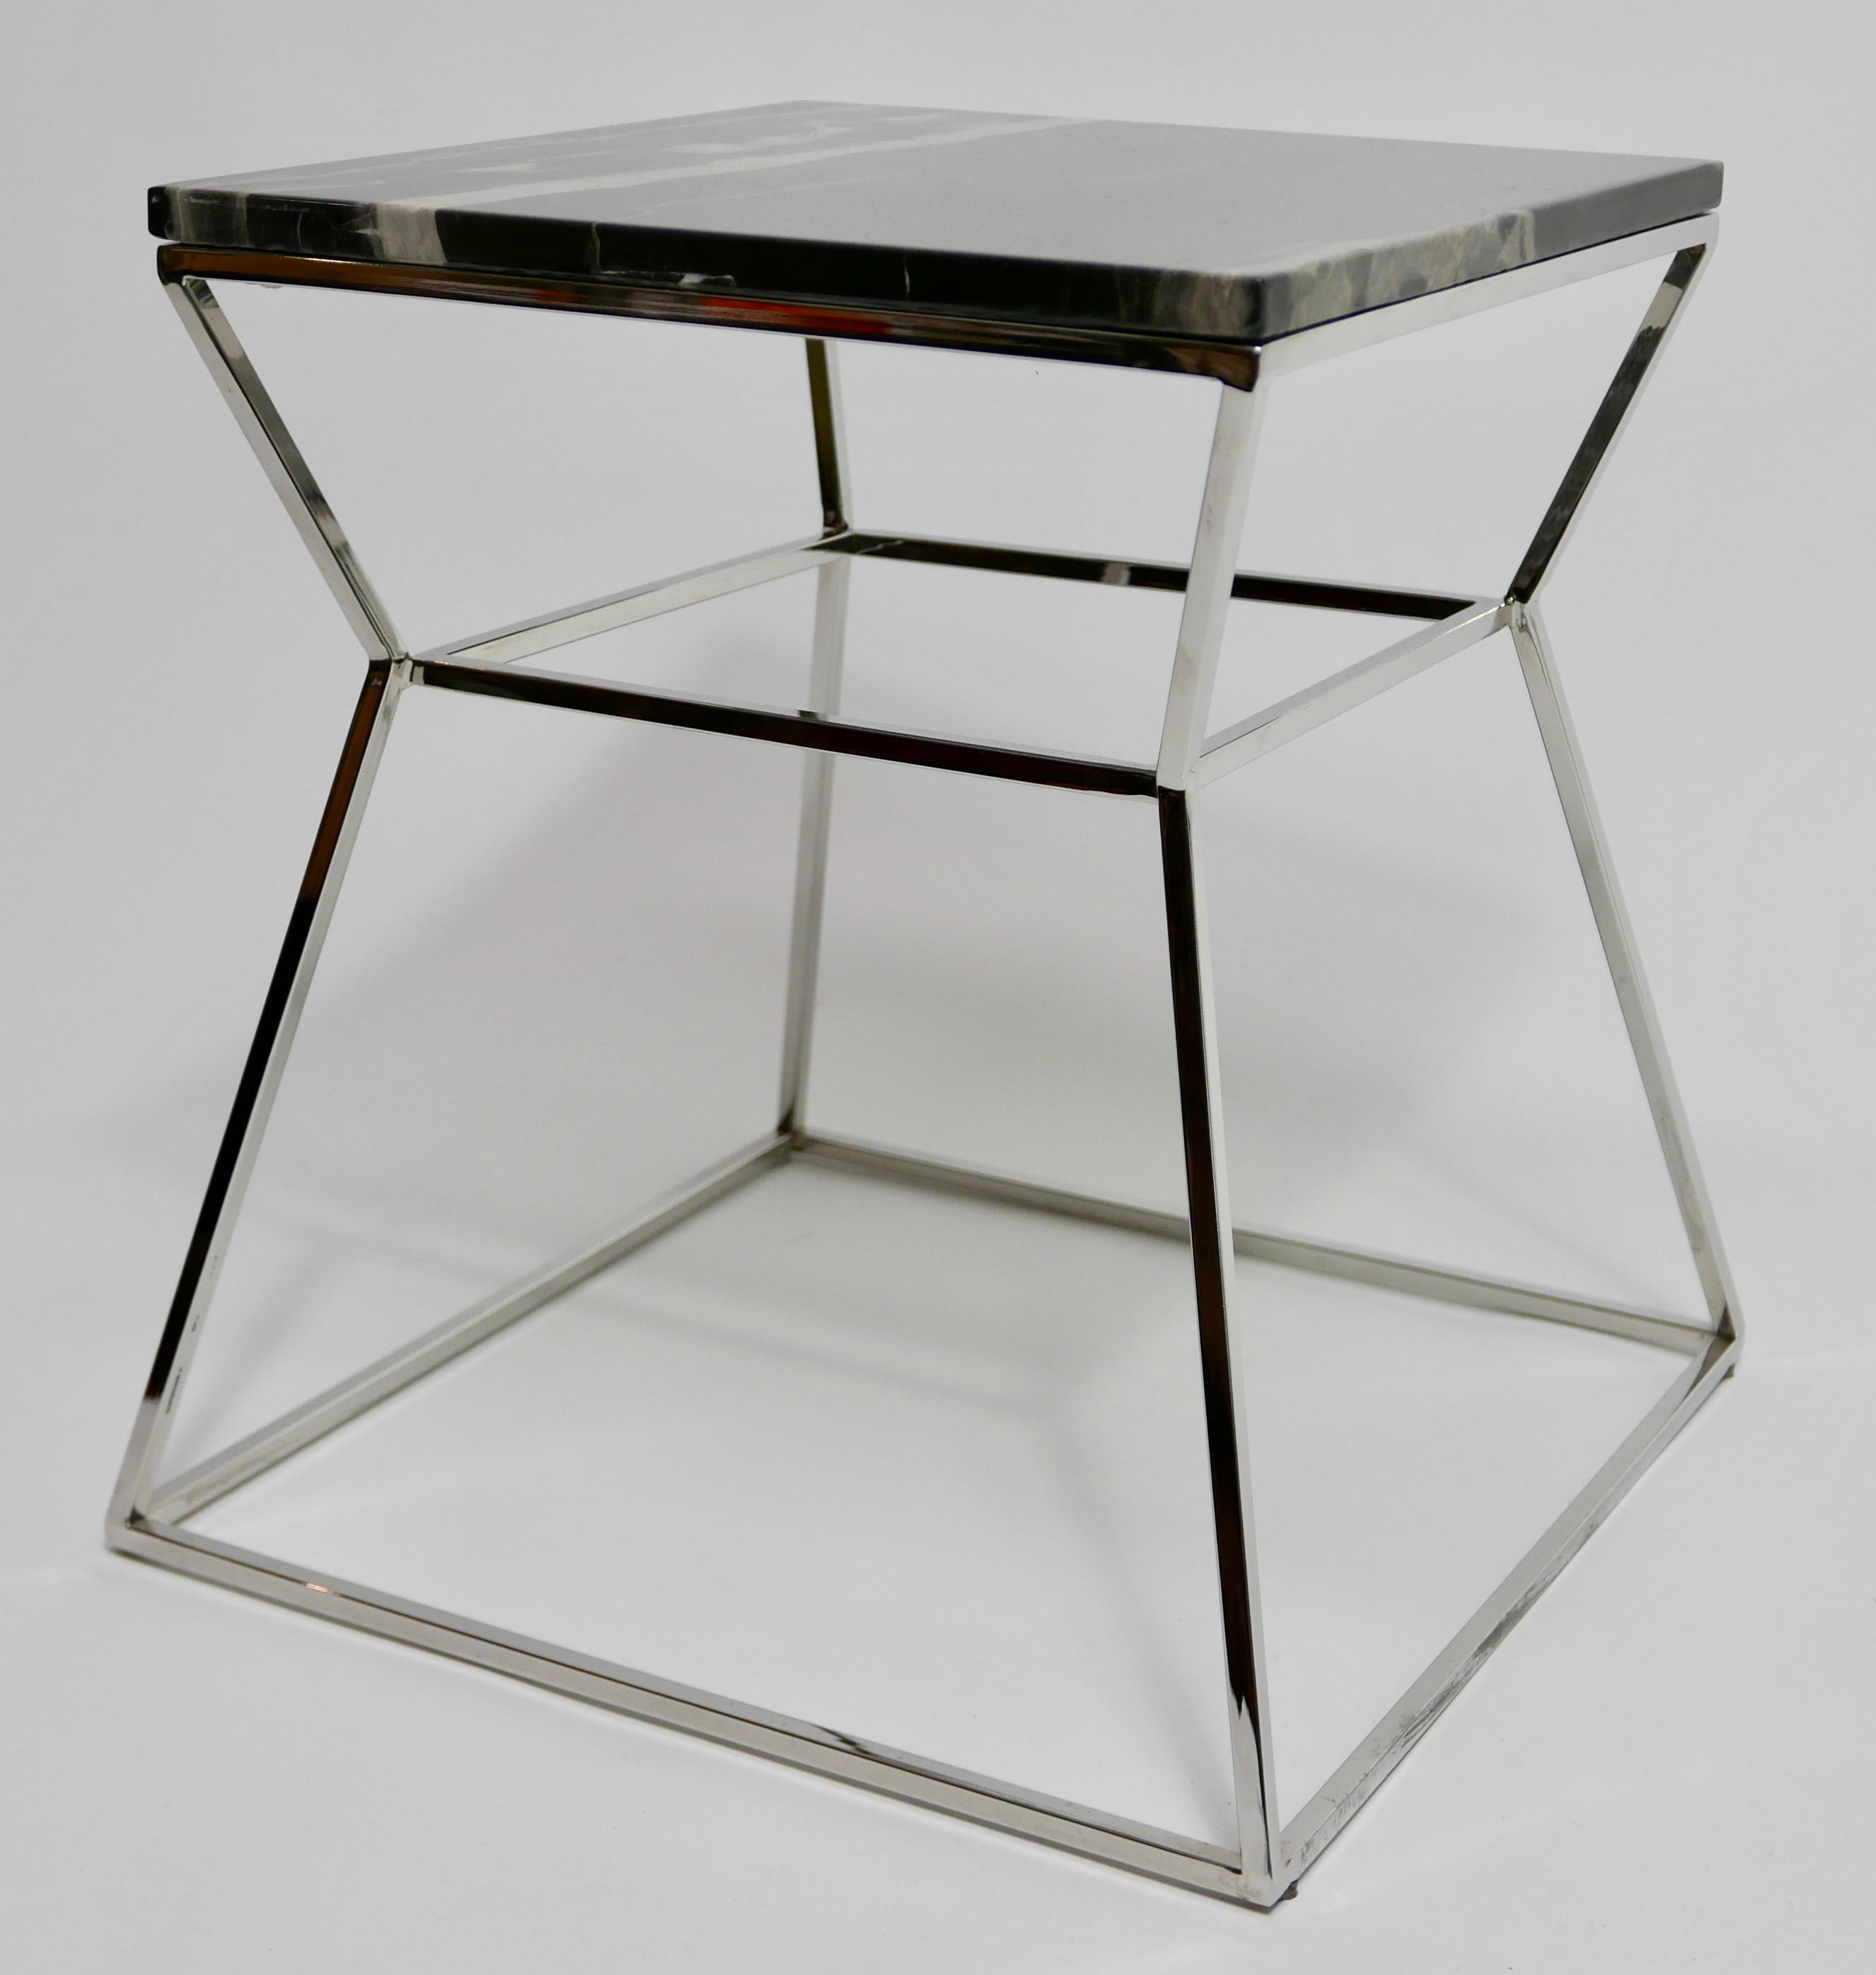 20th Century Mid-Century Modern Chrome Metal with Marble-Top Side Table